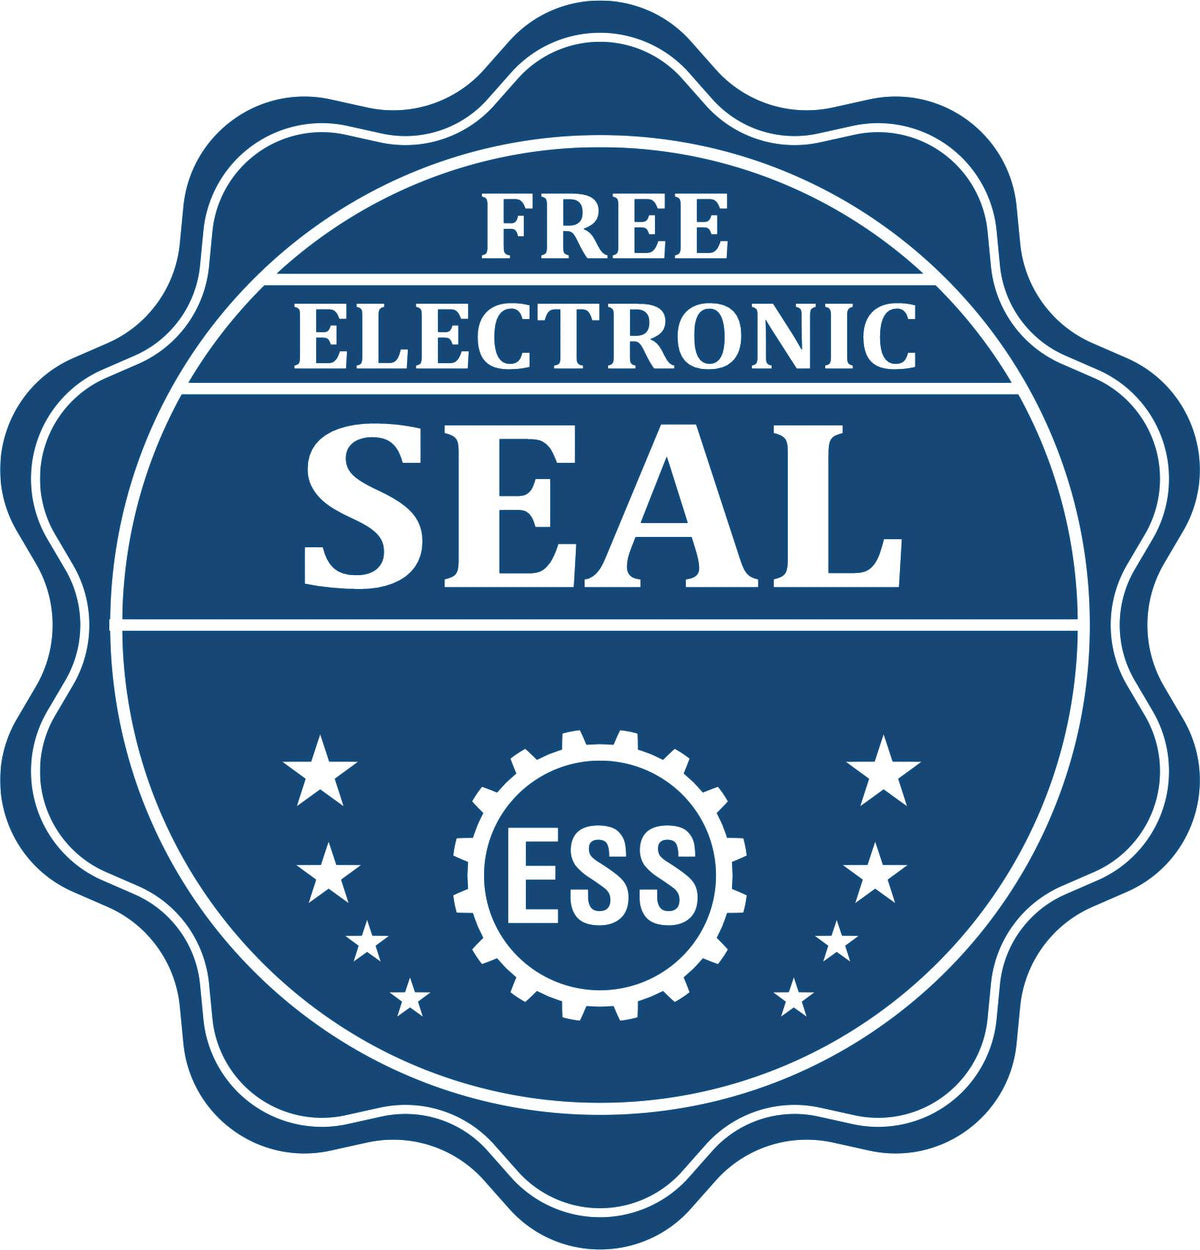 A badge showing a free electronic seal for the Heavy Duty Cast Iron Illinois Engineer Seal Embosser with stars and the ESS gear on the emblem.